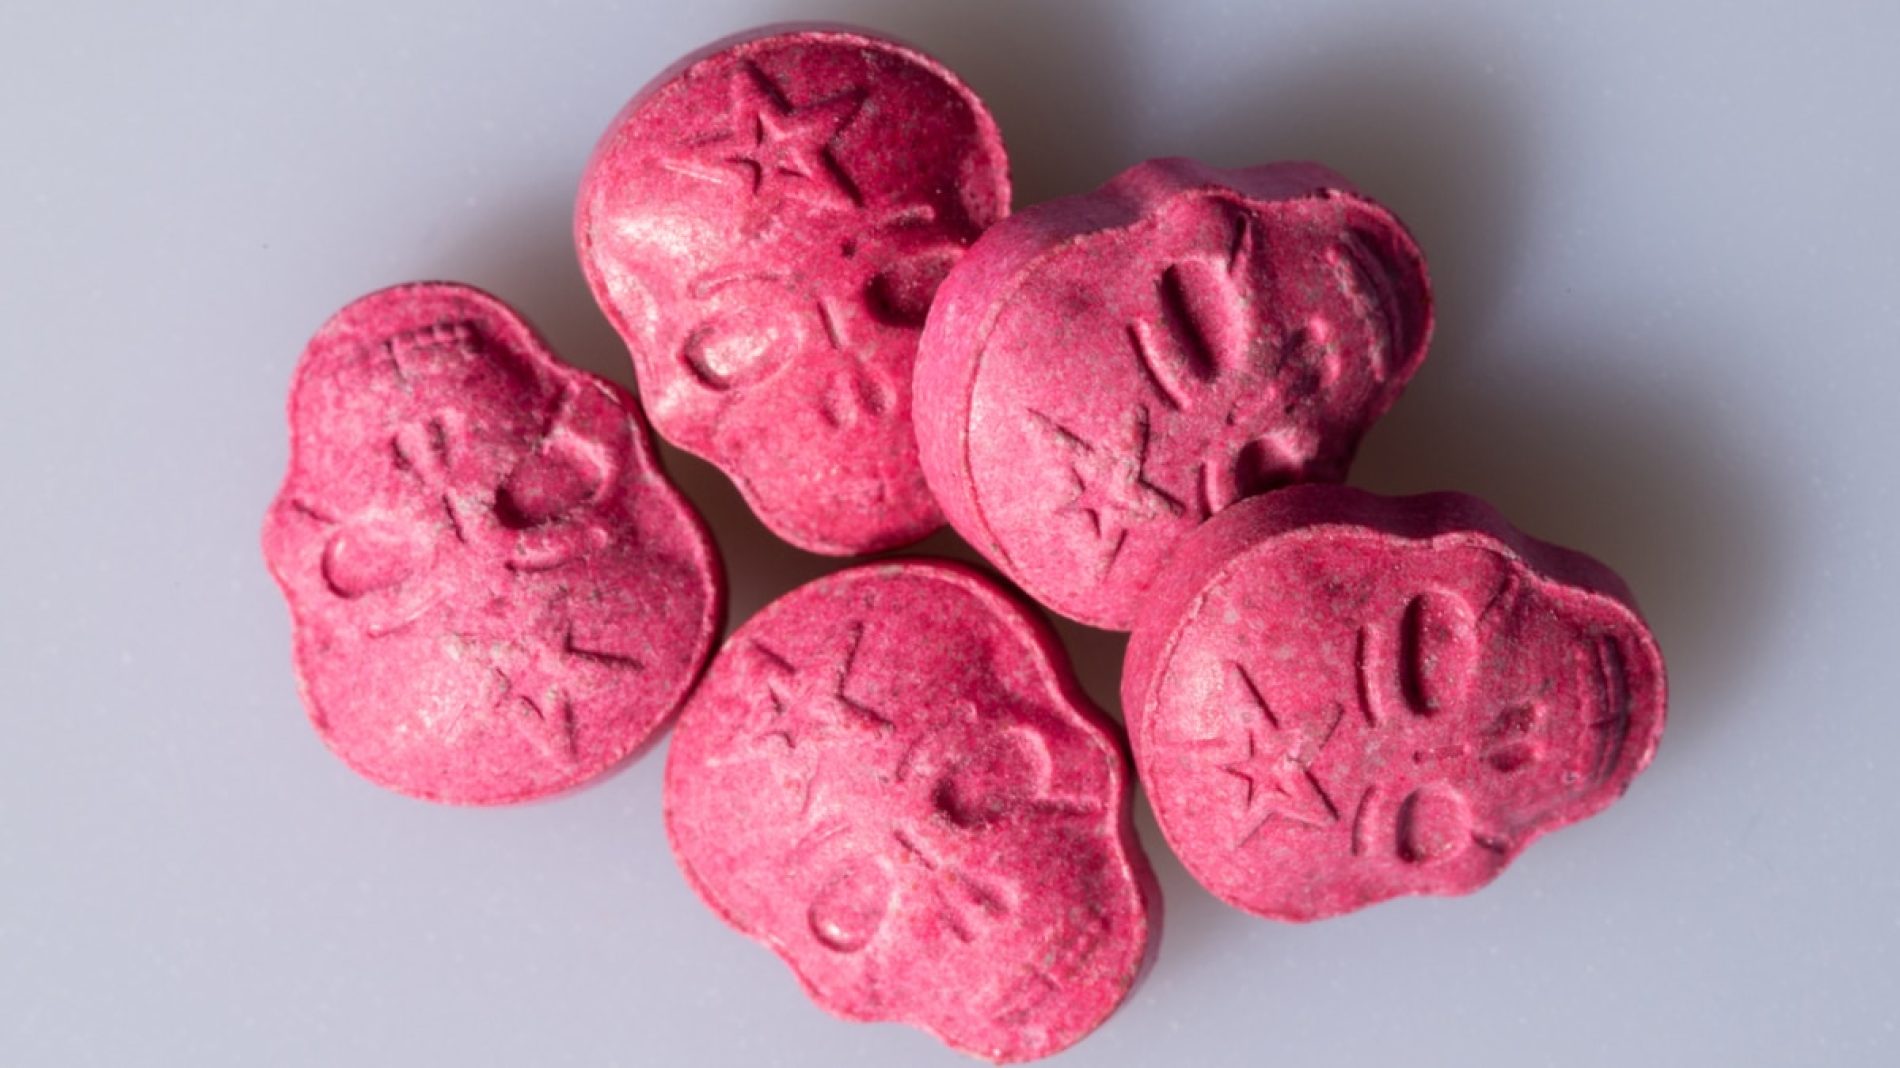 Picture of five red pressed MDMA ecstasy pills in the shape of skulls, each with a red scar on the forehead,